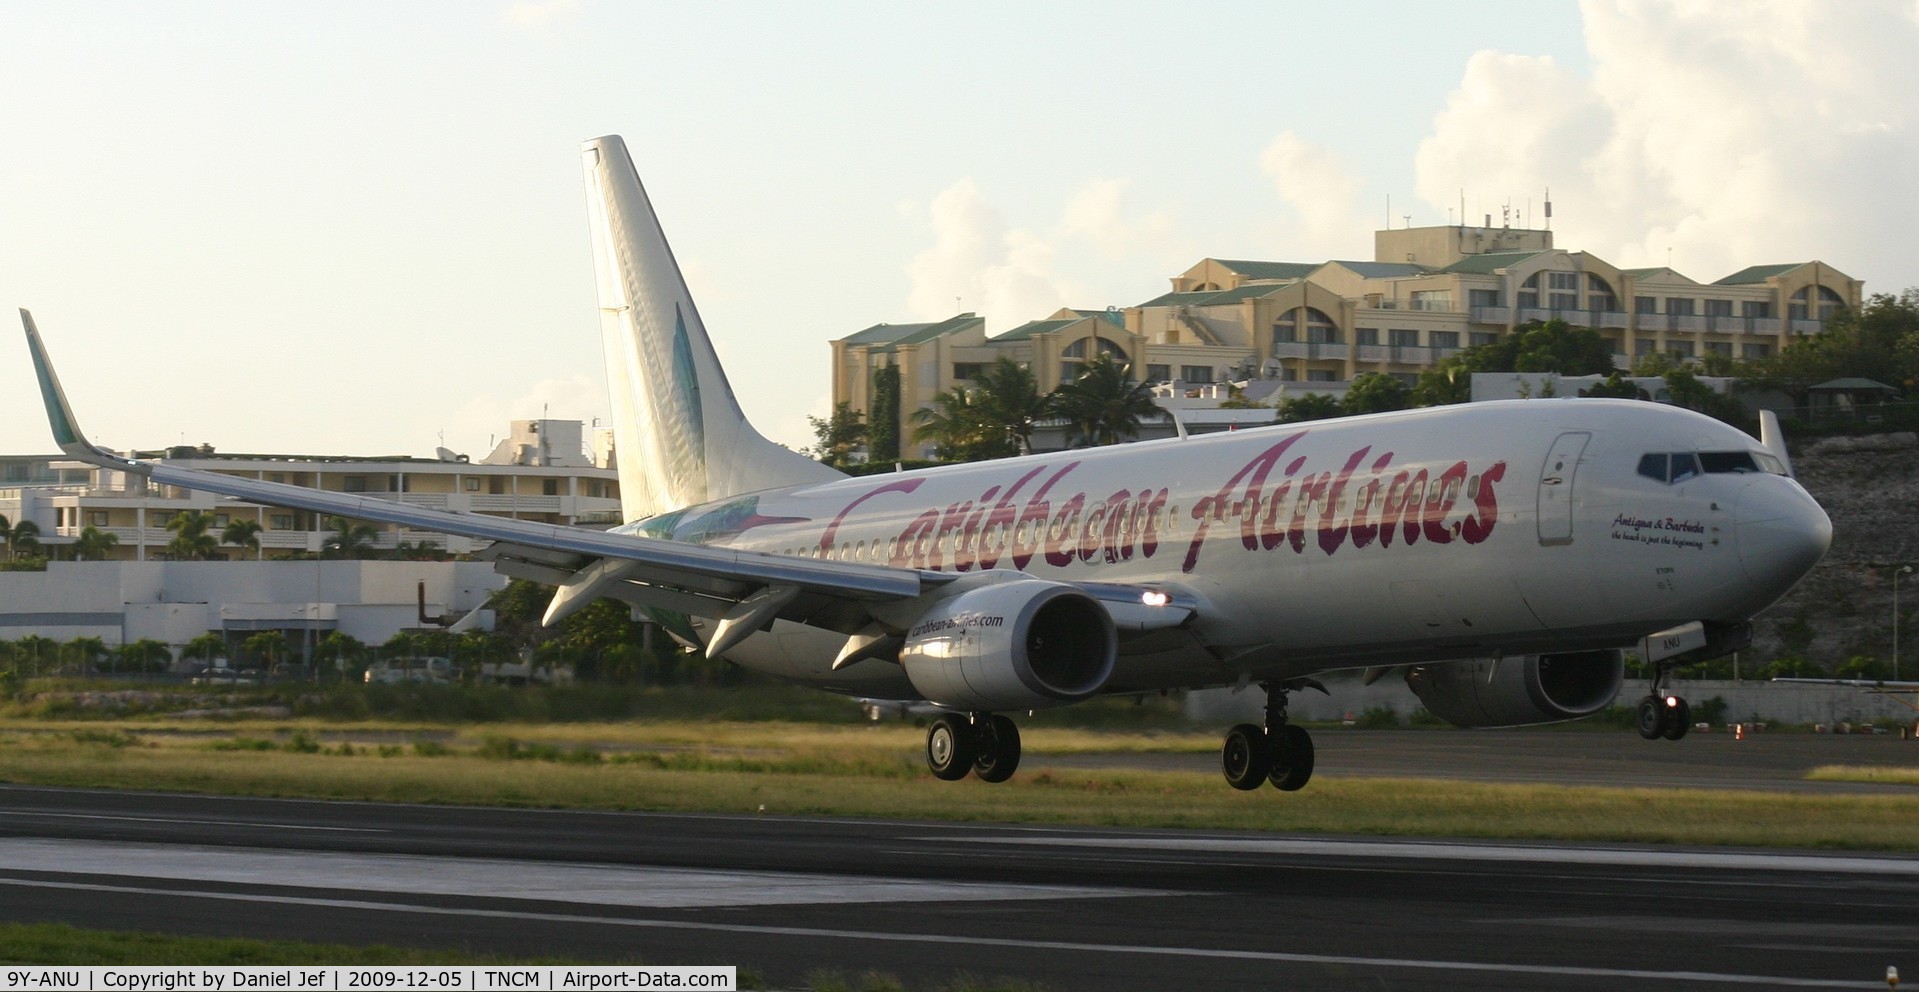 9Y-ANU, 2000 Boeing 737-8Q8 C/N 28235, Caribbean airlines taxing to the holding point A for take off